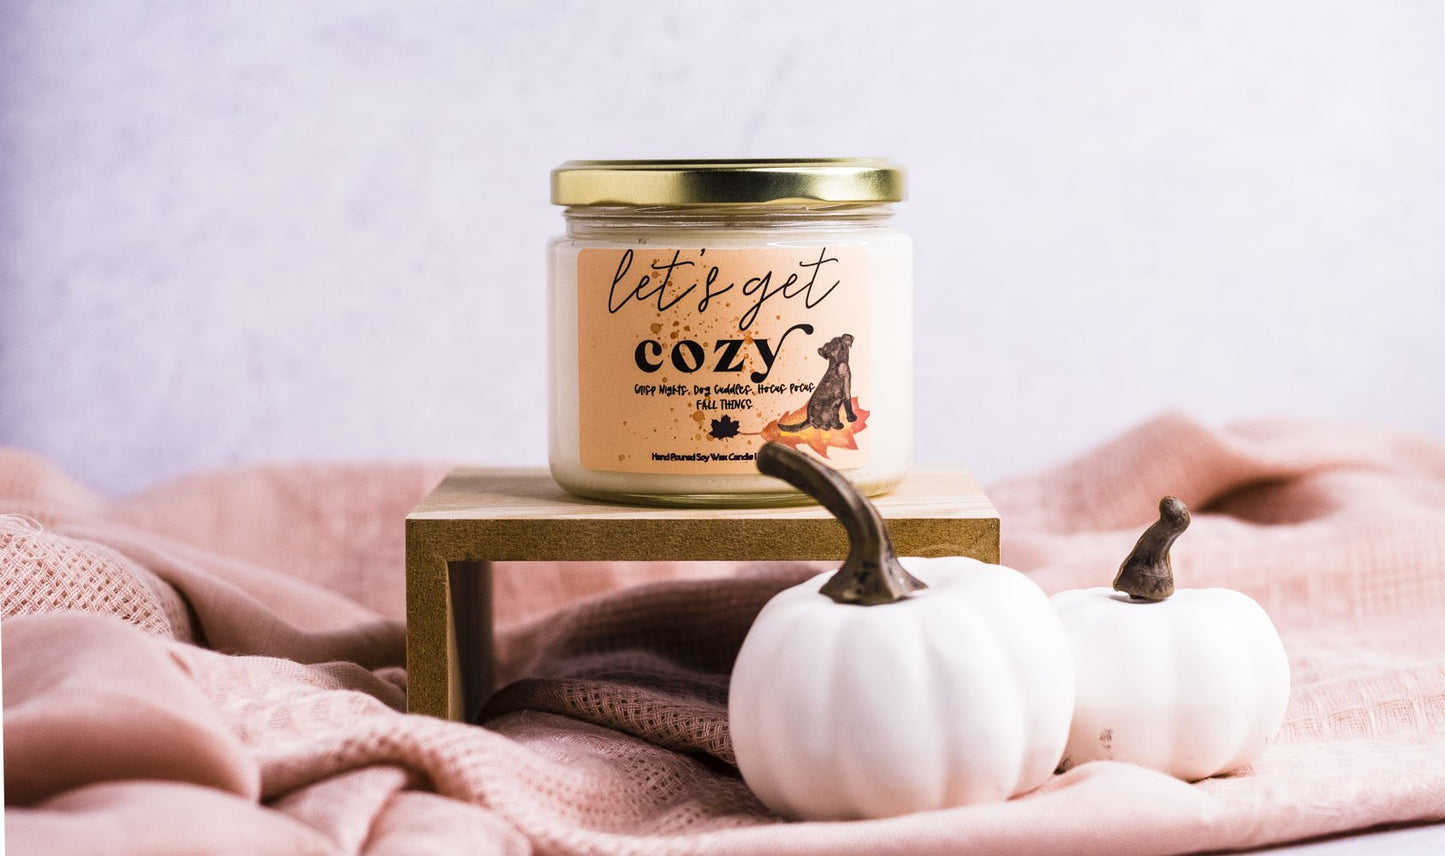 The perfect cozy touch to any fall day. 📸: @honeysuckle  Yankee candle  scents, Fall candle scents, Candle wax scents